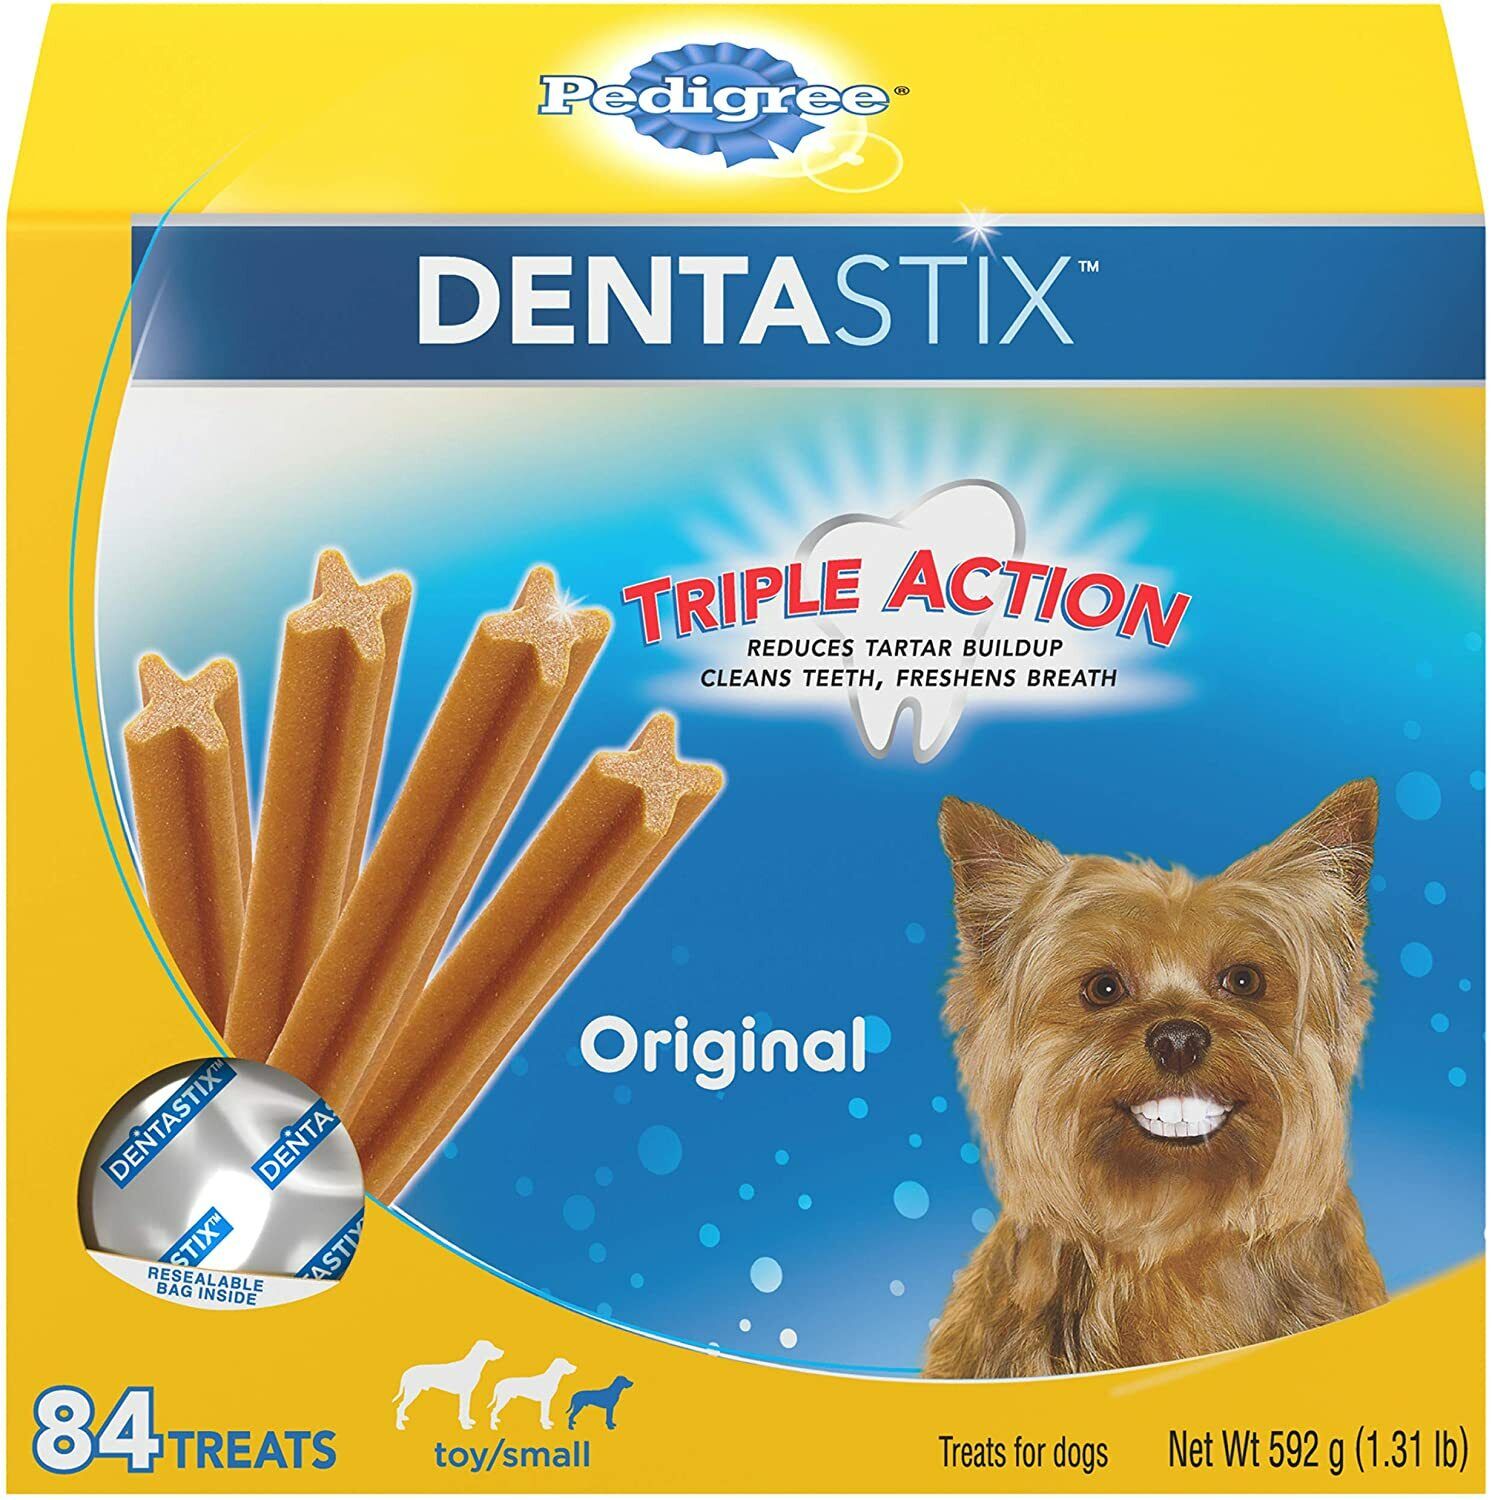 Pedigree DENTASTIX Adult & Puppy Toy/Small Treats for Dogs 5-20lbs.